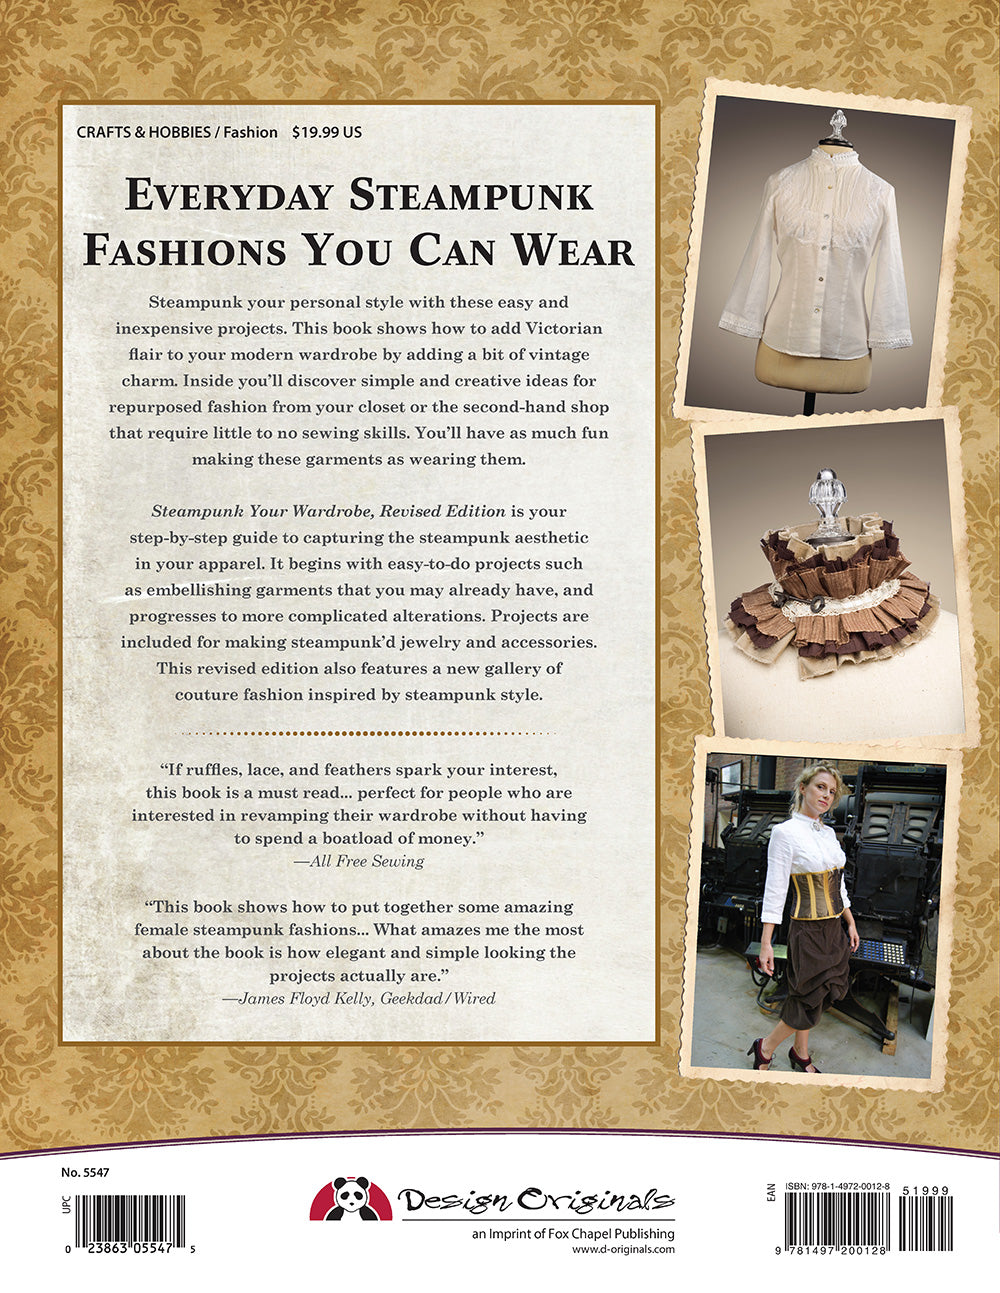 Steampunk Your Wardrobe, Revised Edition